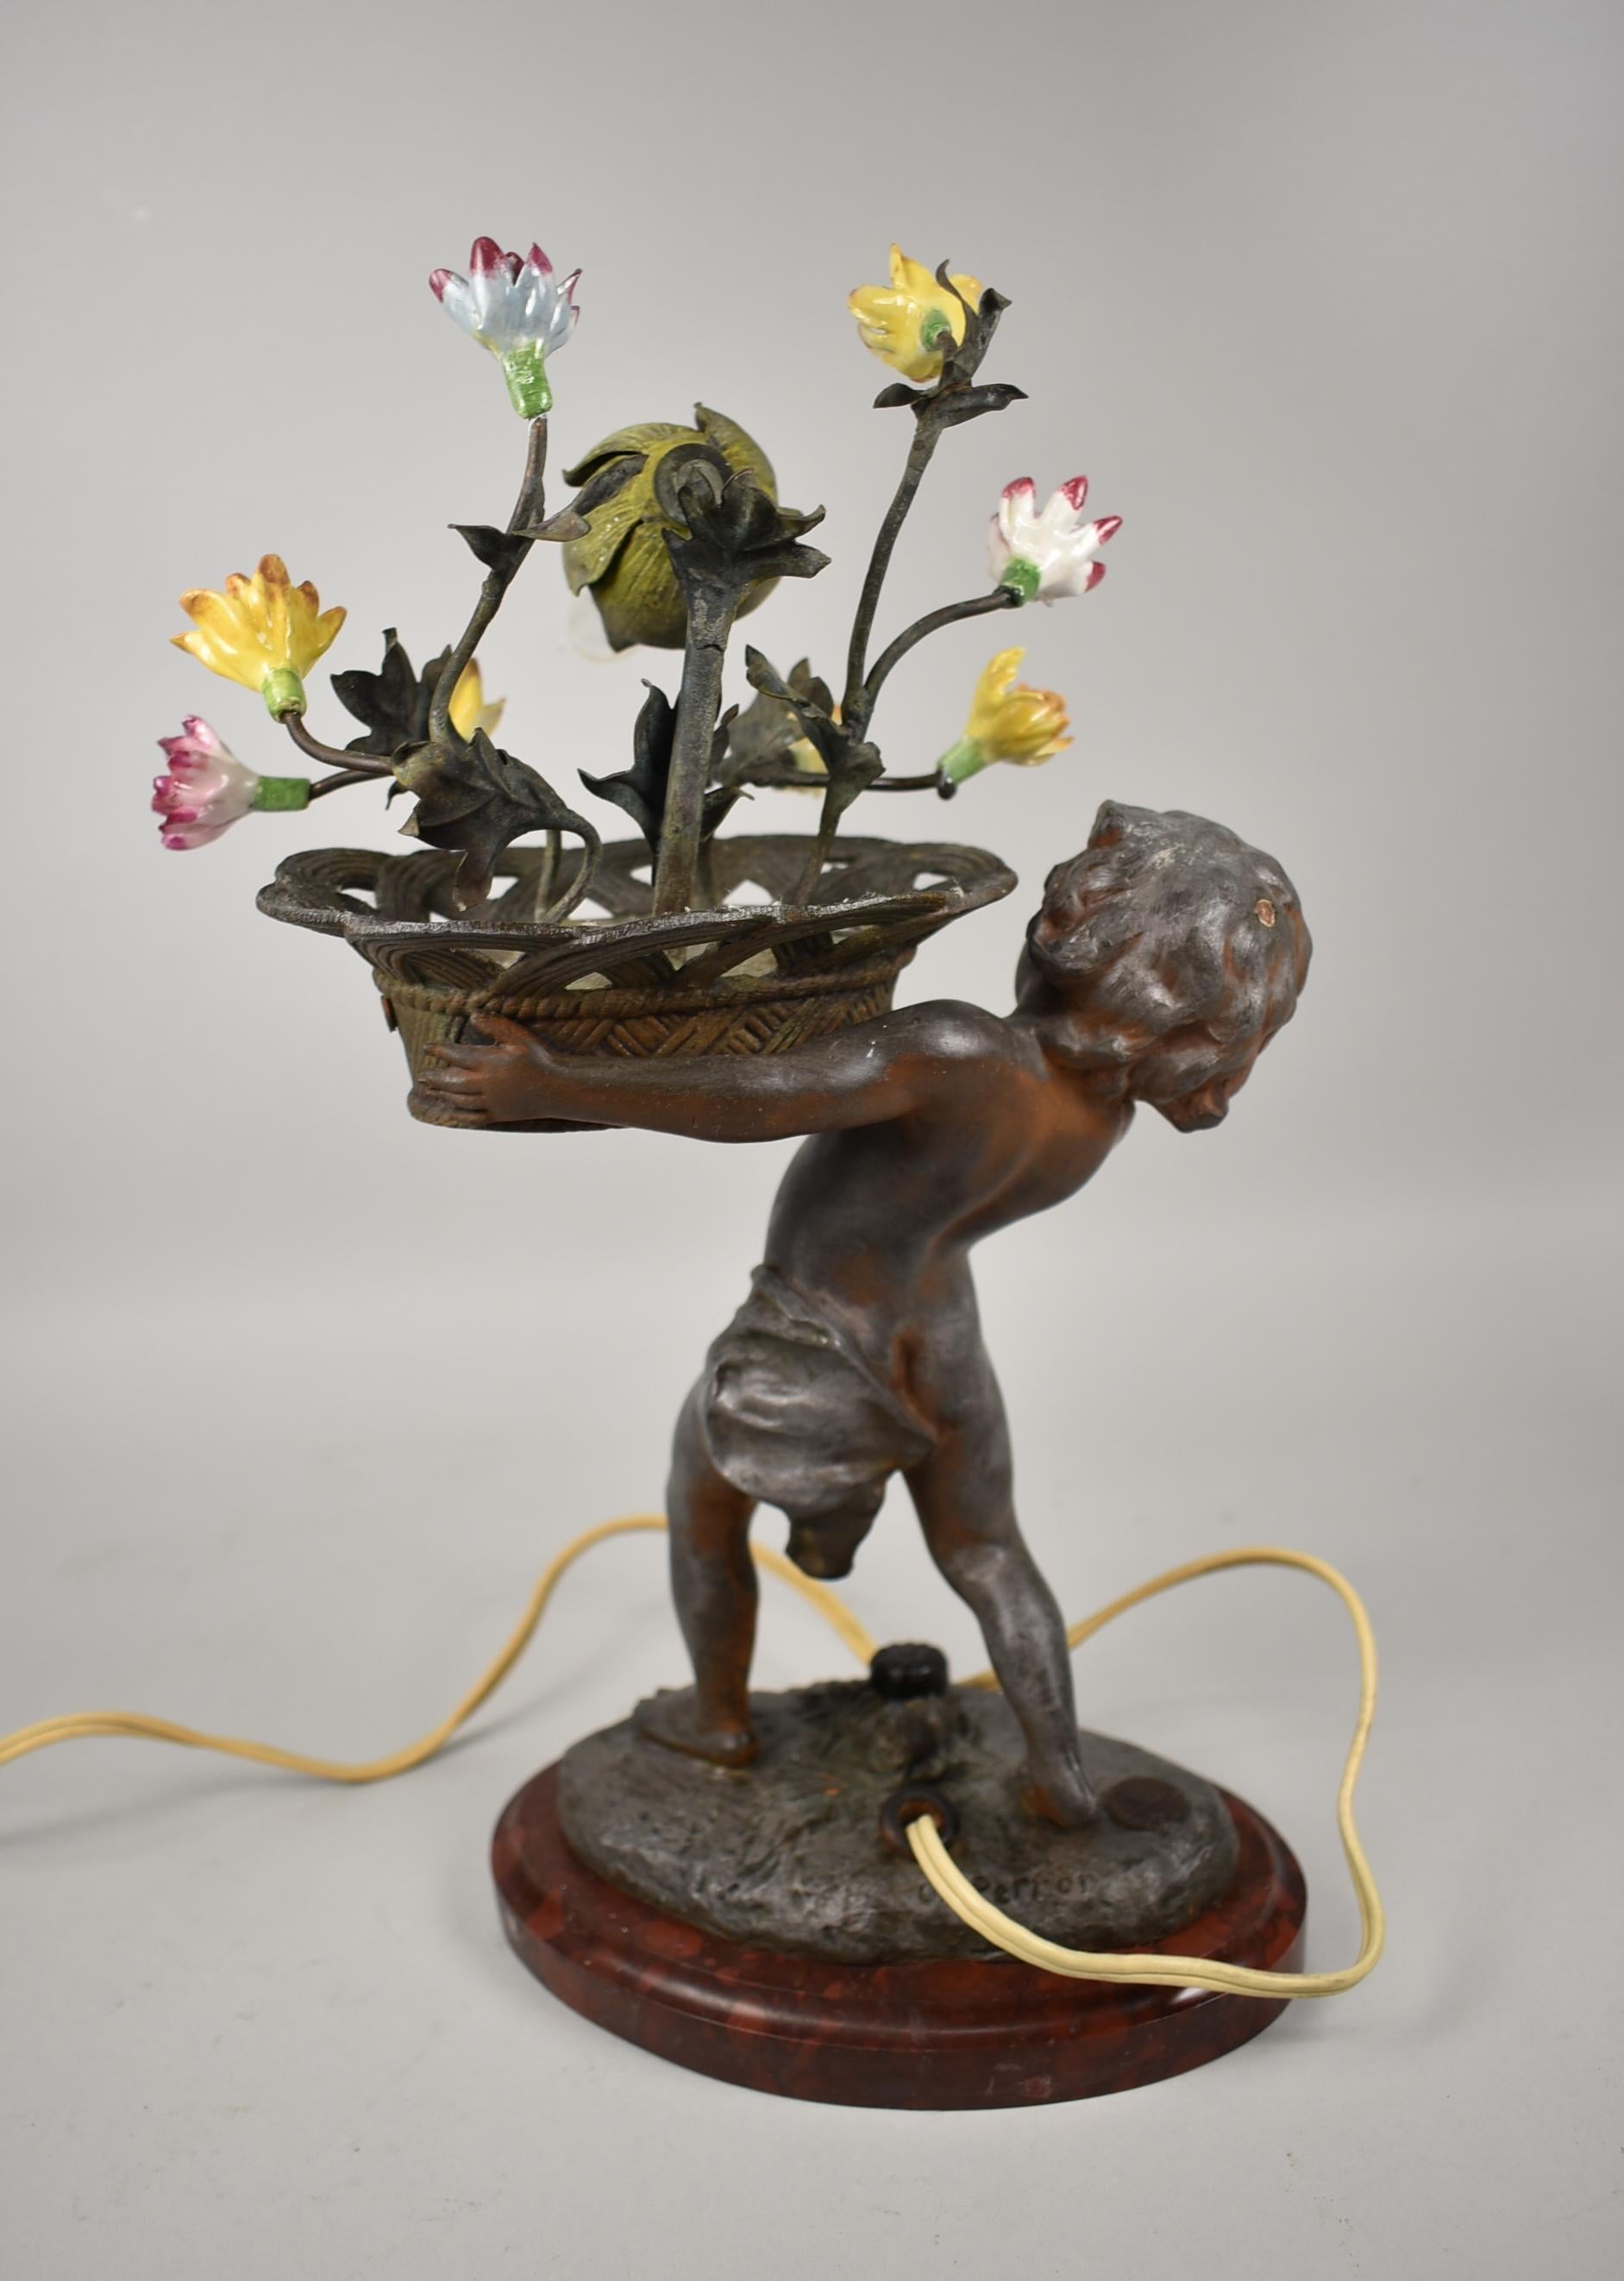 Figural Art Nouveau lamp with child holding a basket of colorful flowers. Made in Paris France by Charles Perror 1862-1934. Working order. Dimensions: 13